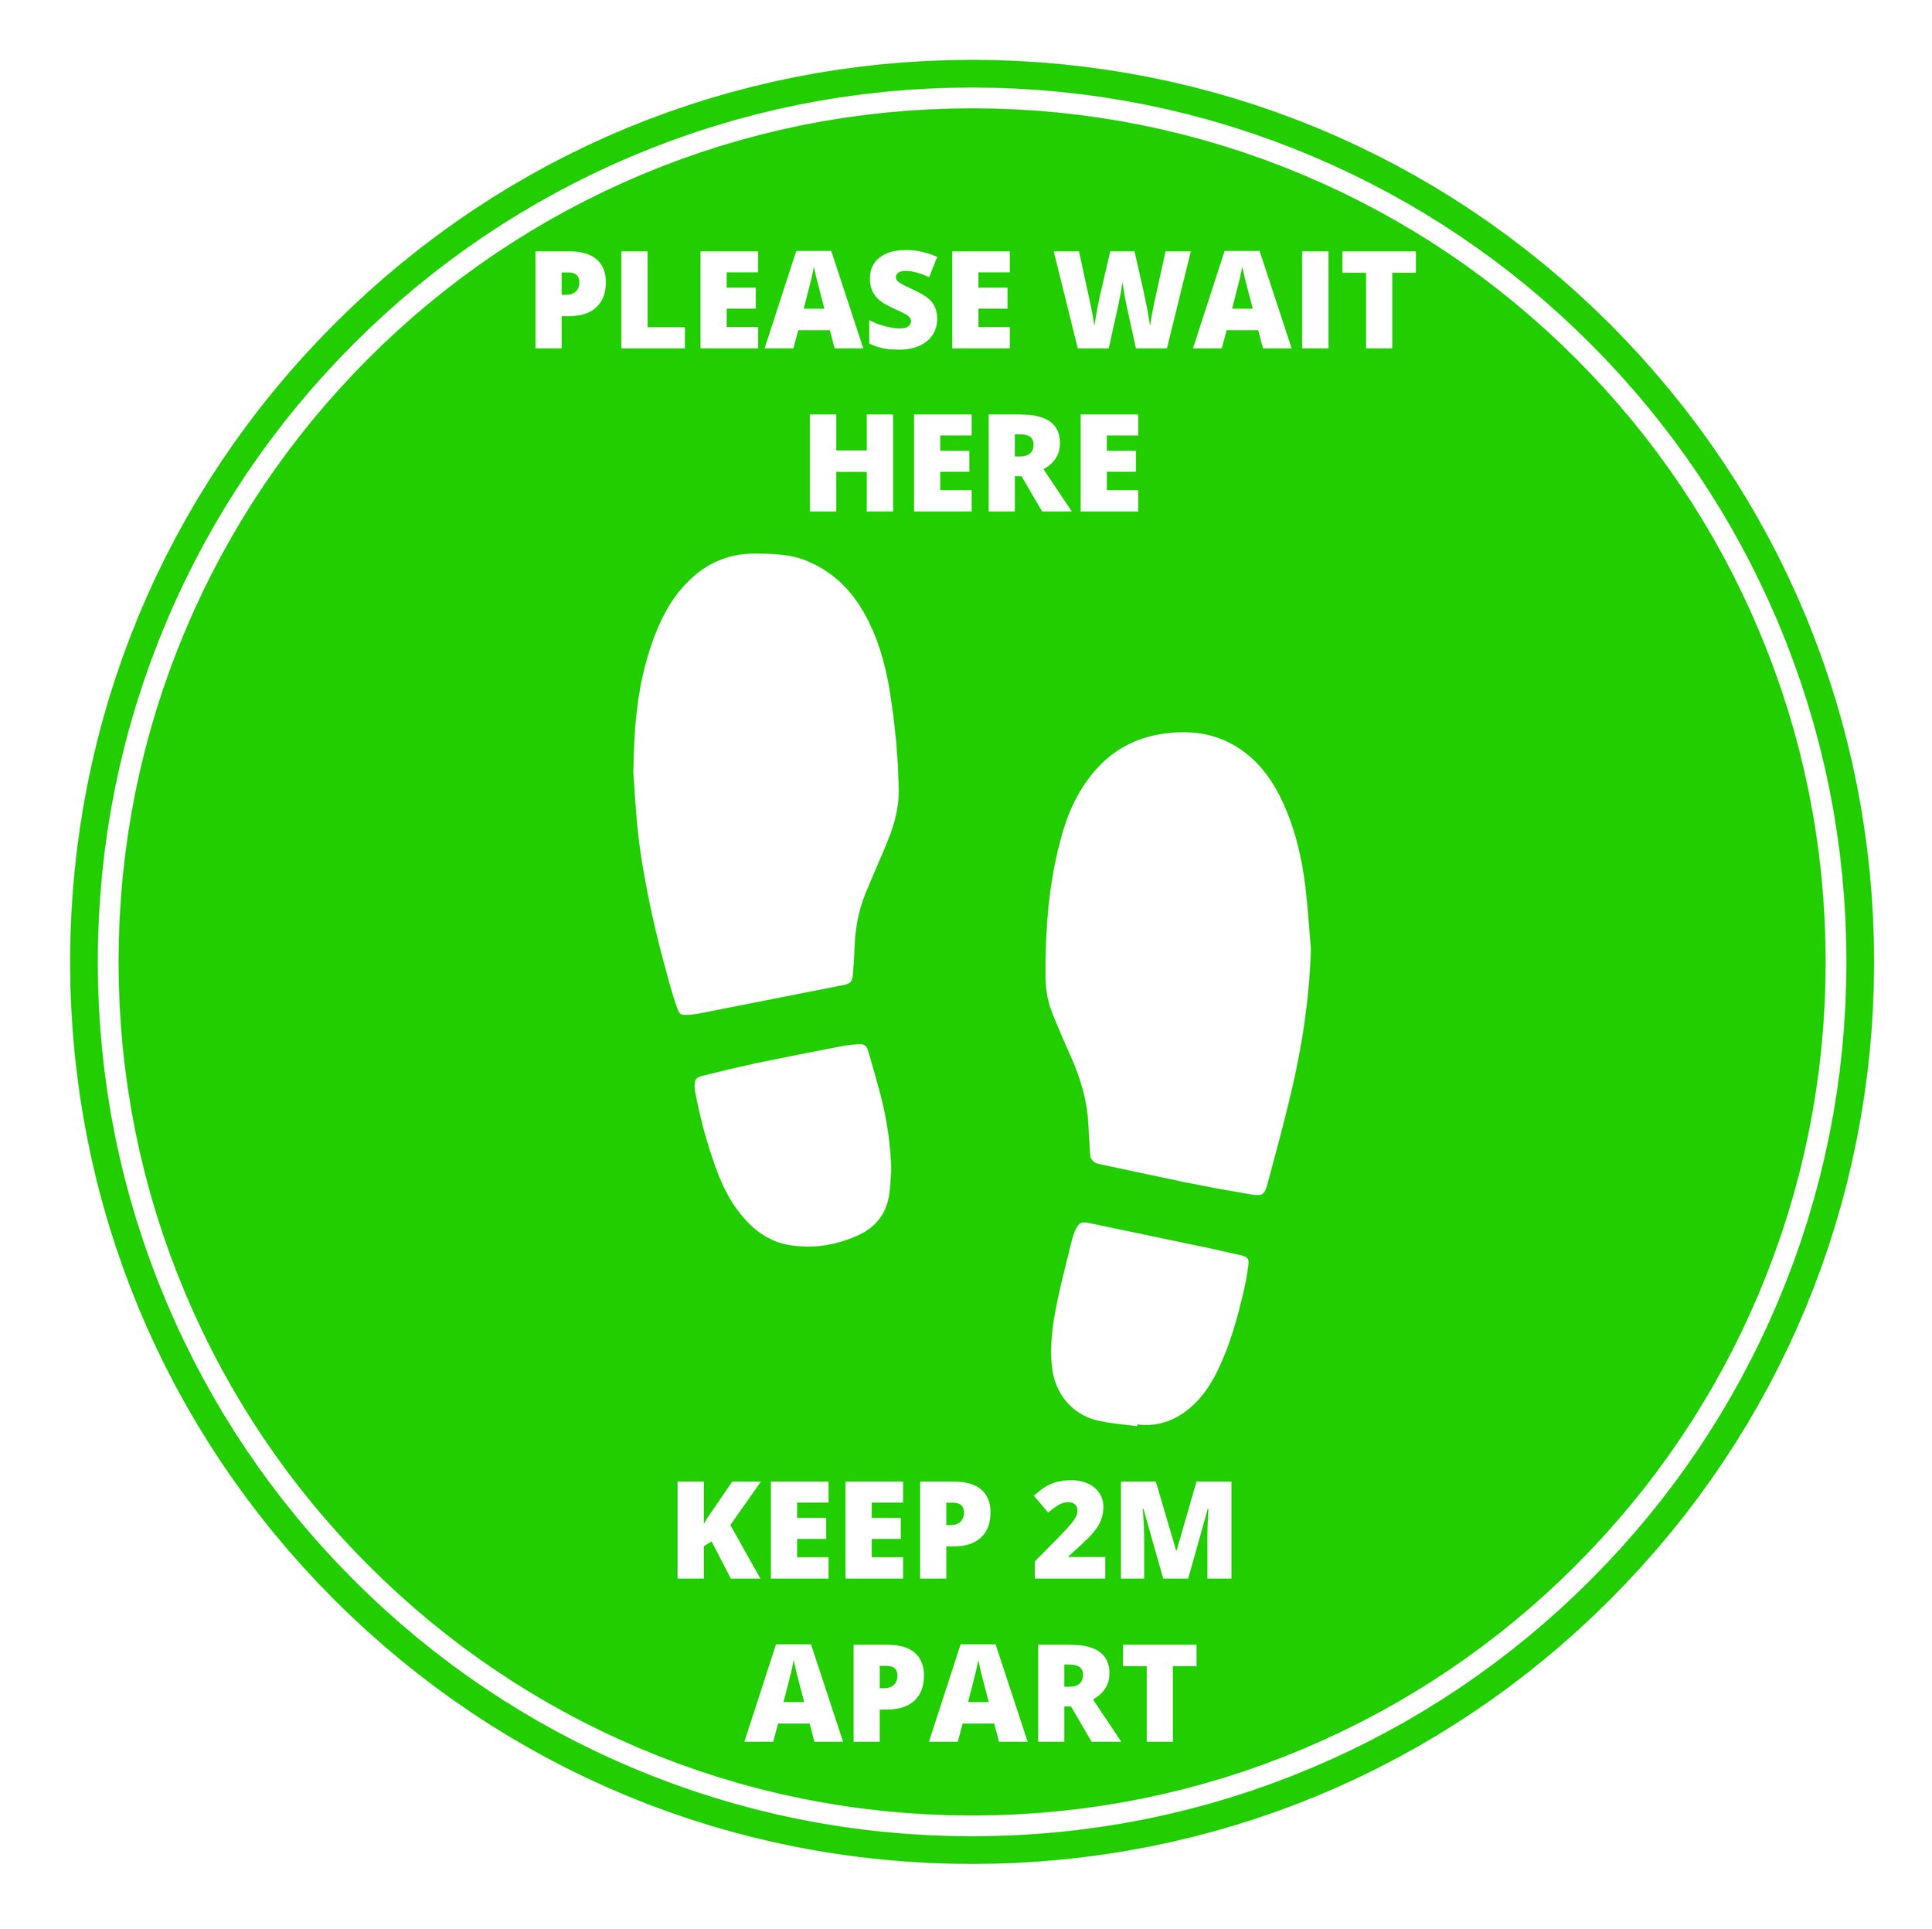 Please Wait Here Stand Here Yellow Floor Reminder Marker for Crowd Control Guidance 15 Pack 12 Social Distancing Floor Signs 6ft Vinyl PVC Public Decal,Keep 6 Feet Distance Label 